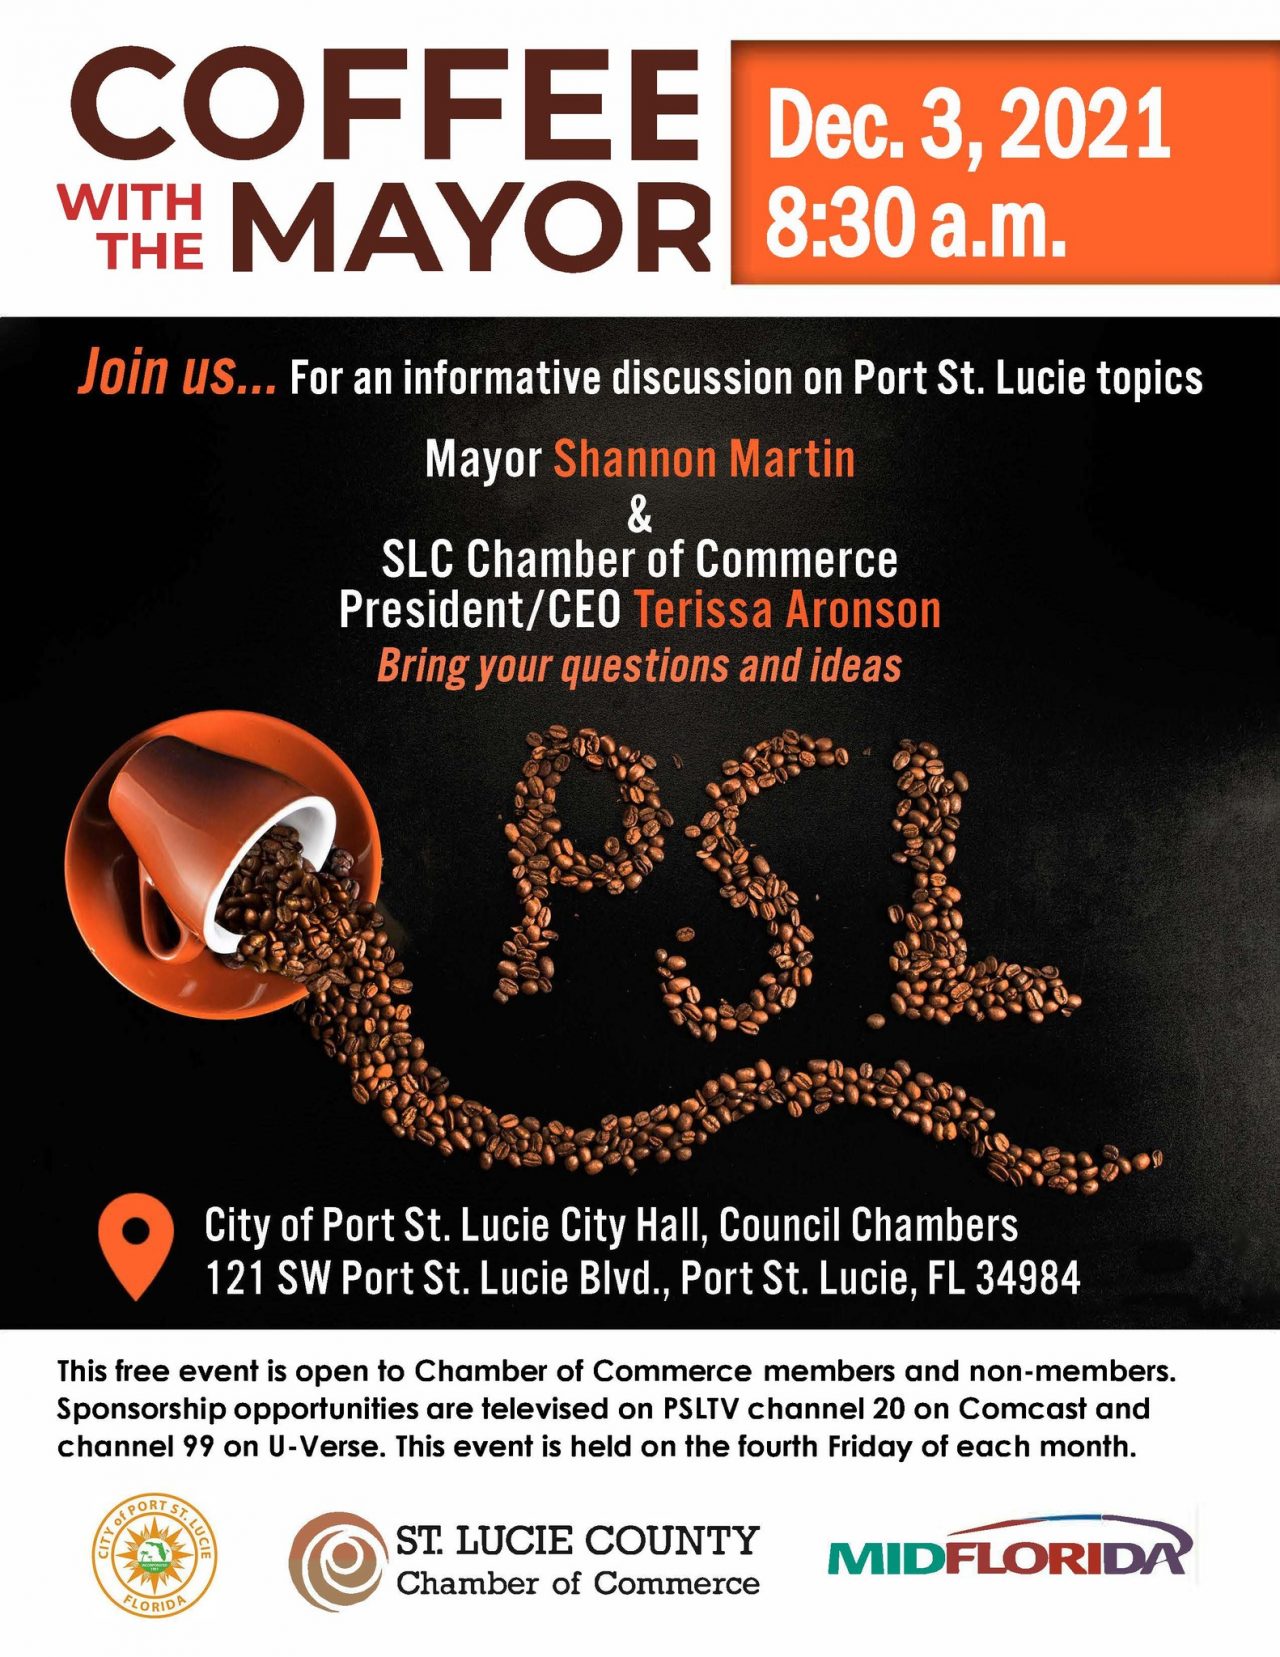 Coffee w/ the Mayor St. Lucie County Chamber of Commerce